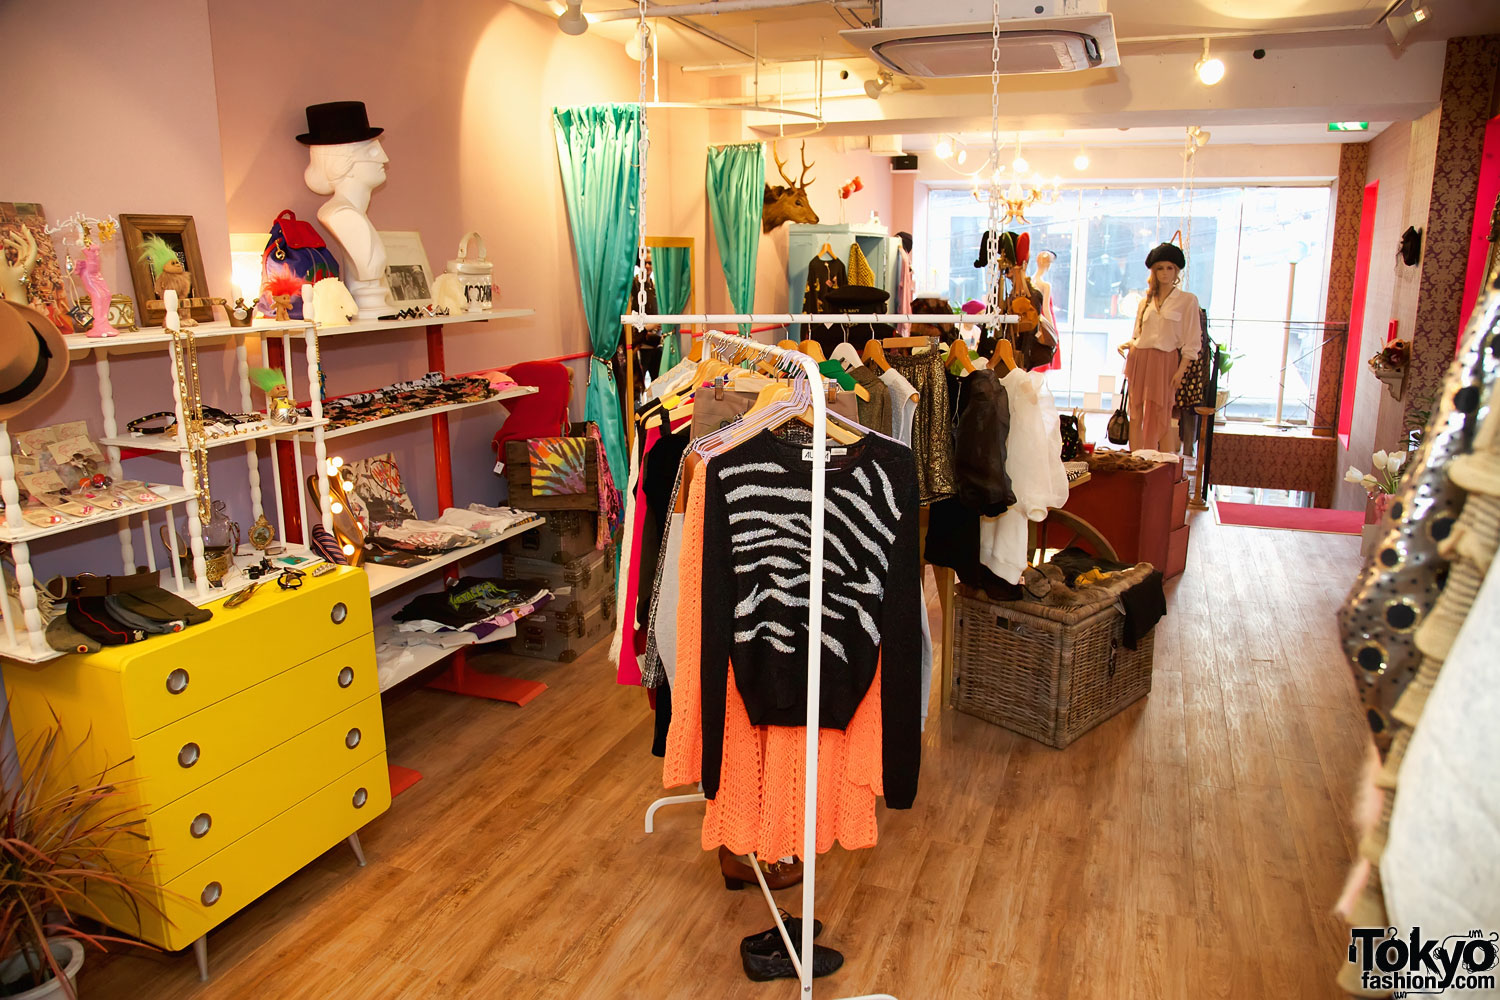 How To Small Clothing Boutique Interior Design Ideas